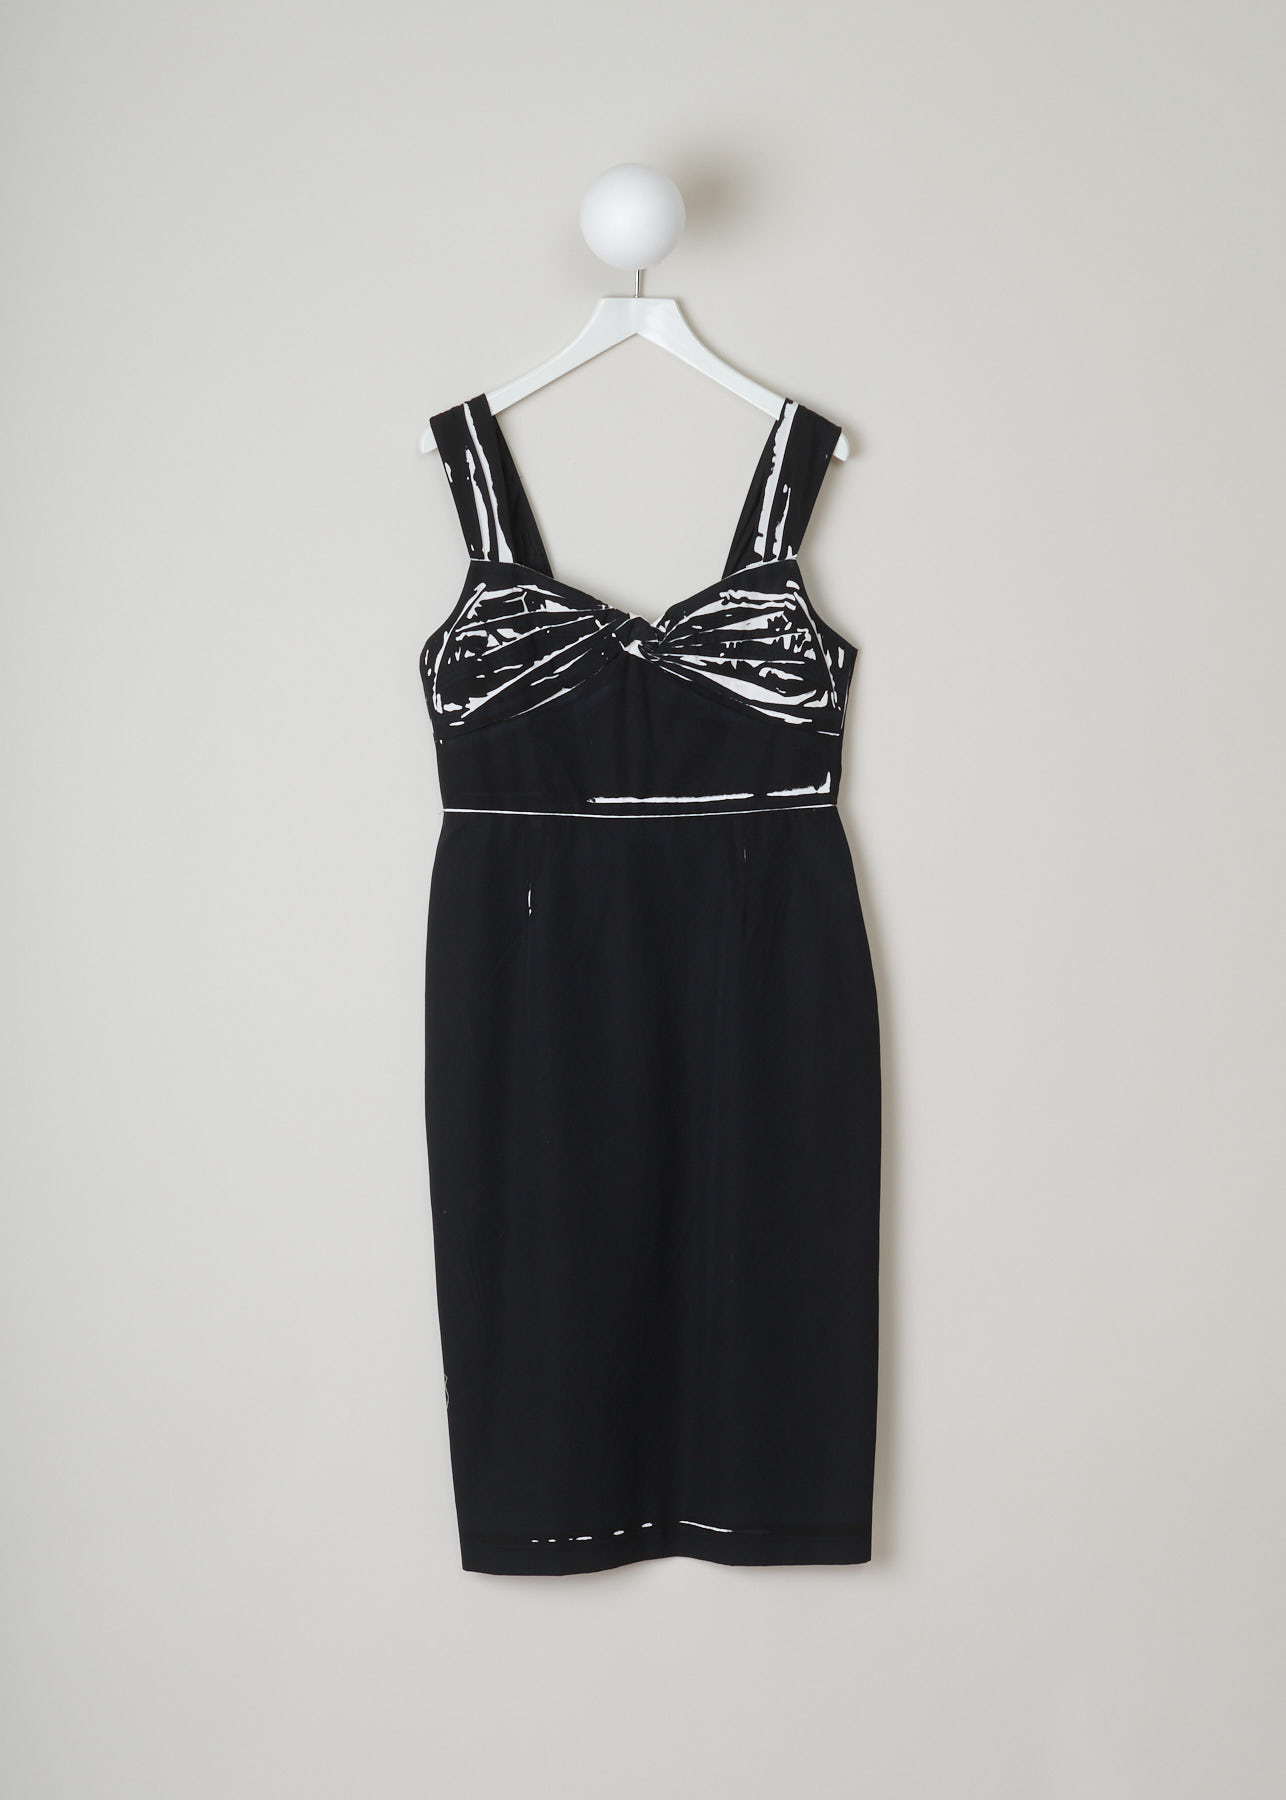 Prada, black dress trimmed with white, PopelineDivisa_P36L6_F0964_BiancoNero, black, front, An black knee long dress. low cut neckline, sleeveless with a concealed zipper on the back. The white trim gives the dress a playful look.